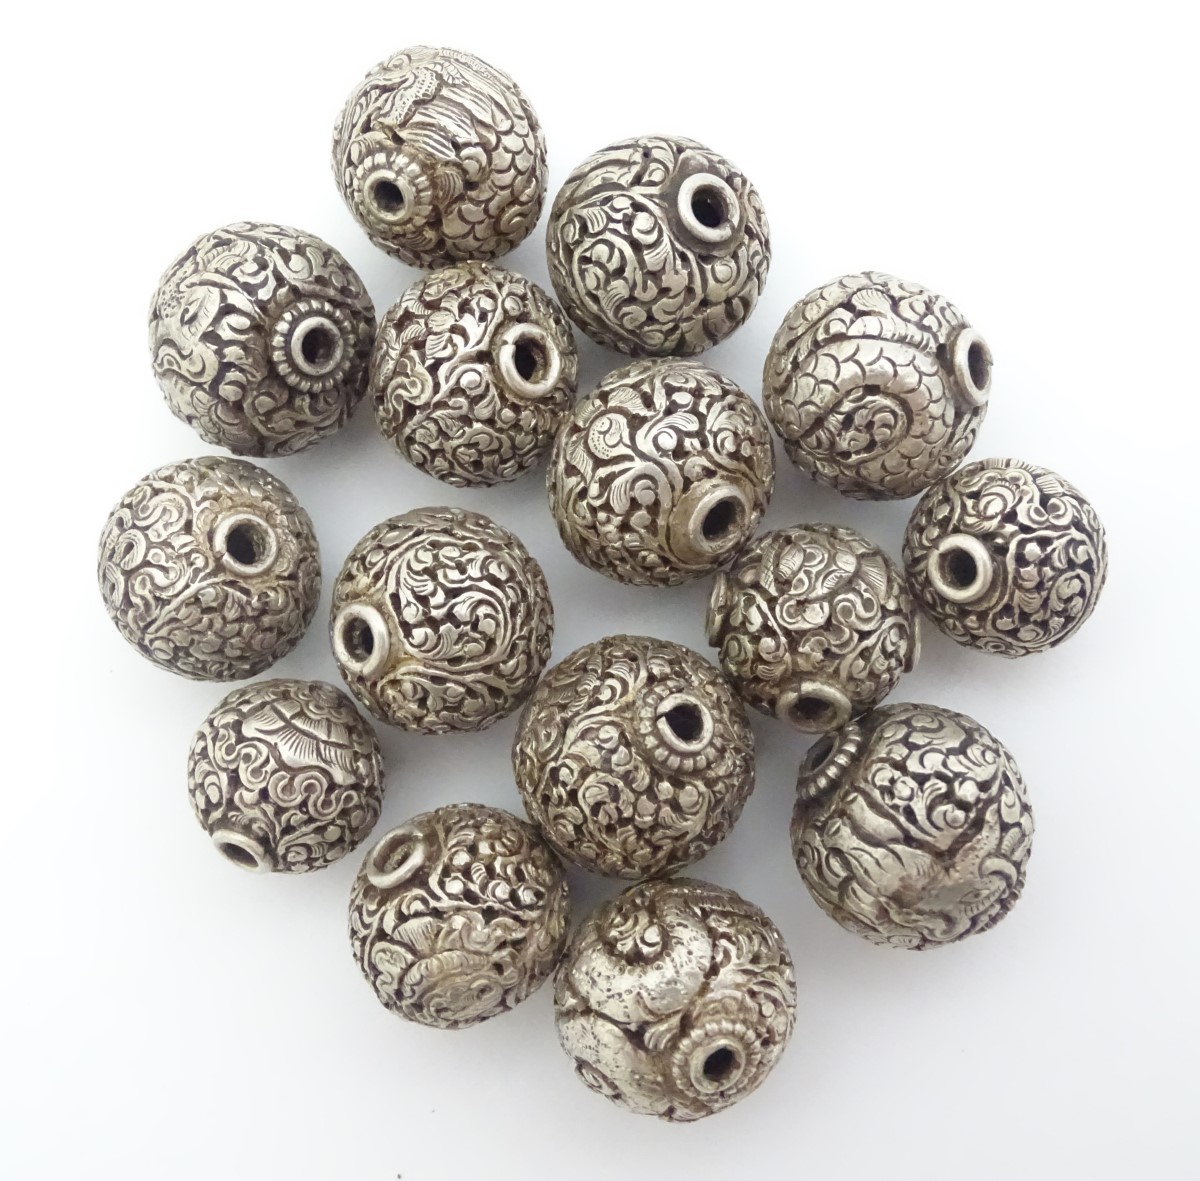 14 assorted white metal beads with various acanthus scroll and scrolling dragon decoration. The